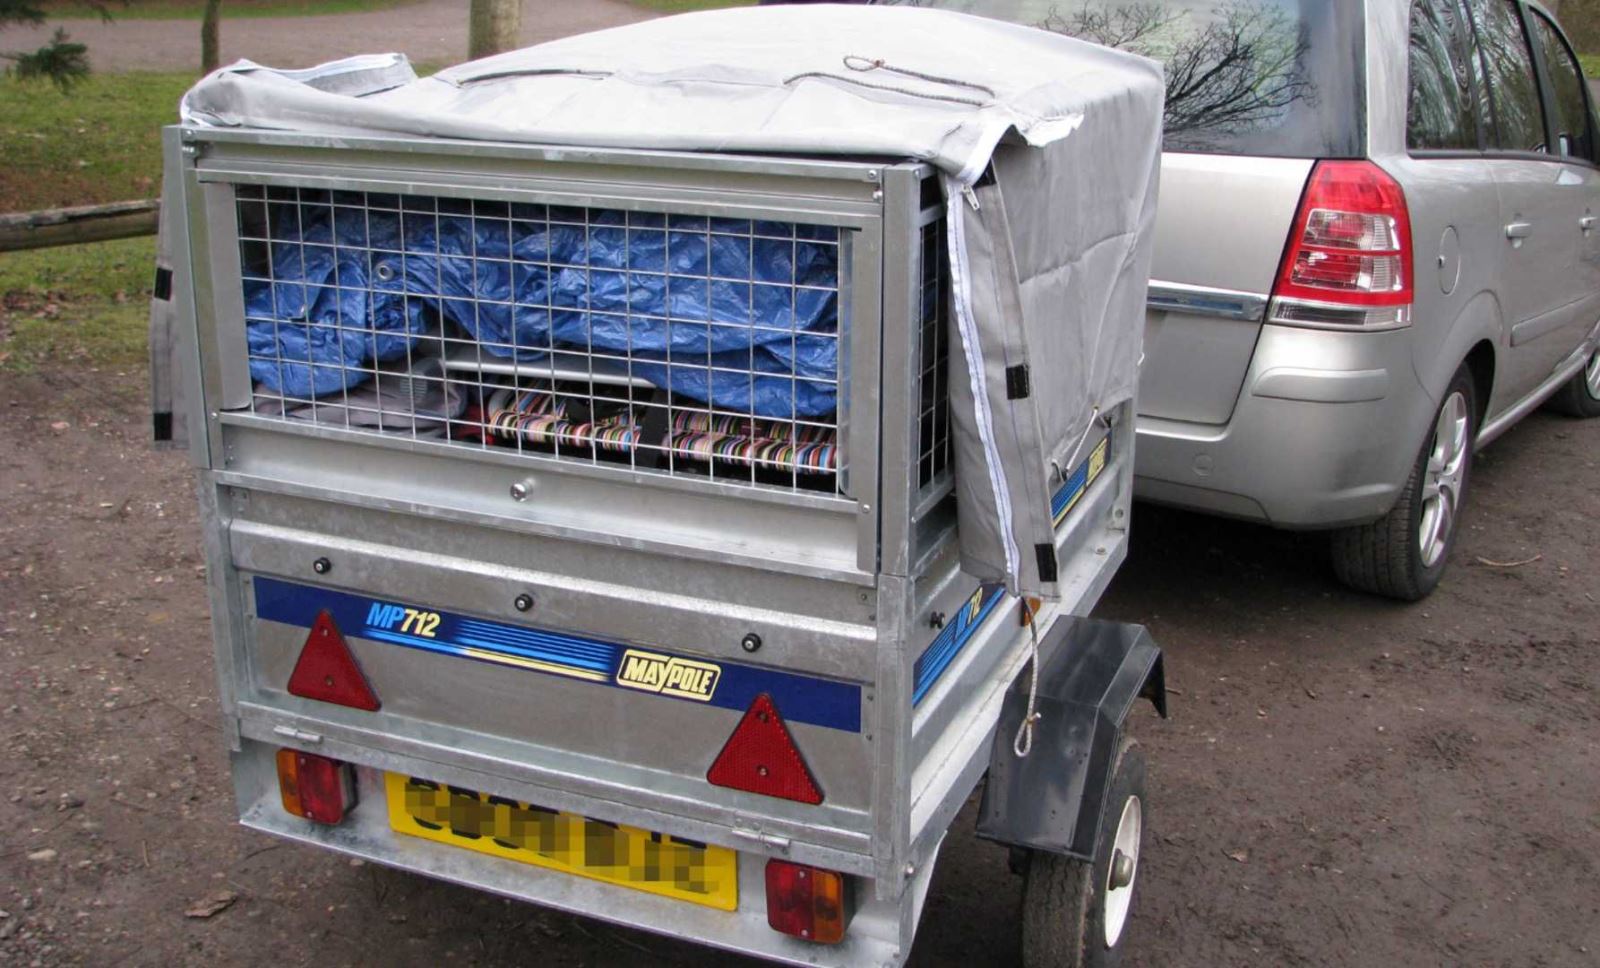 A camping trailer mesh cage